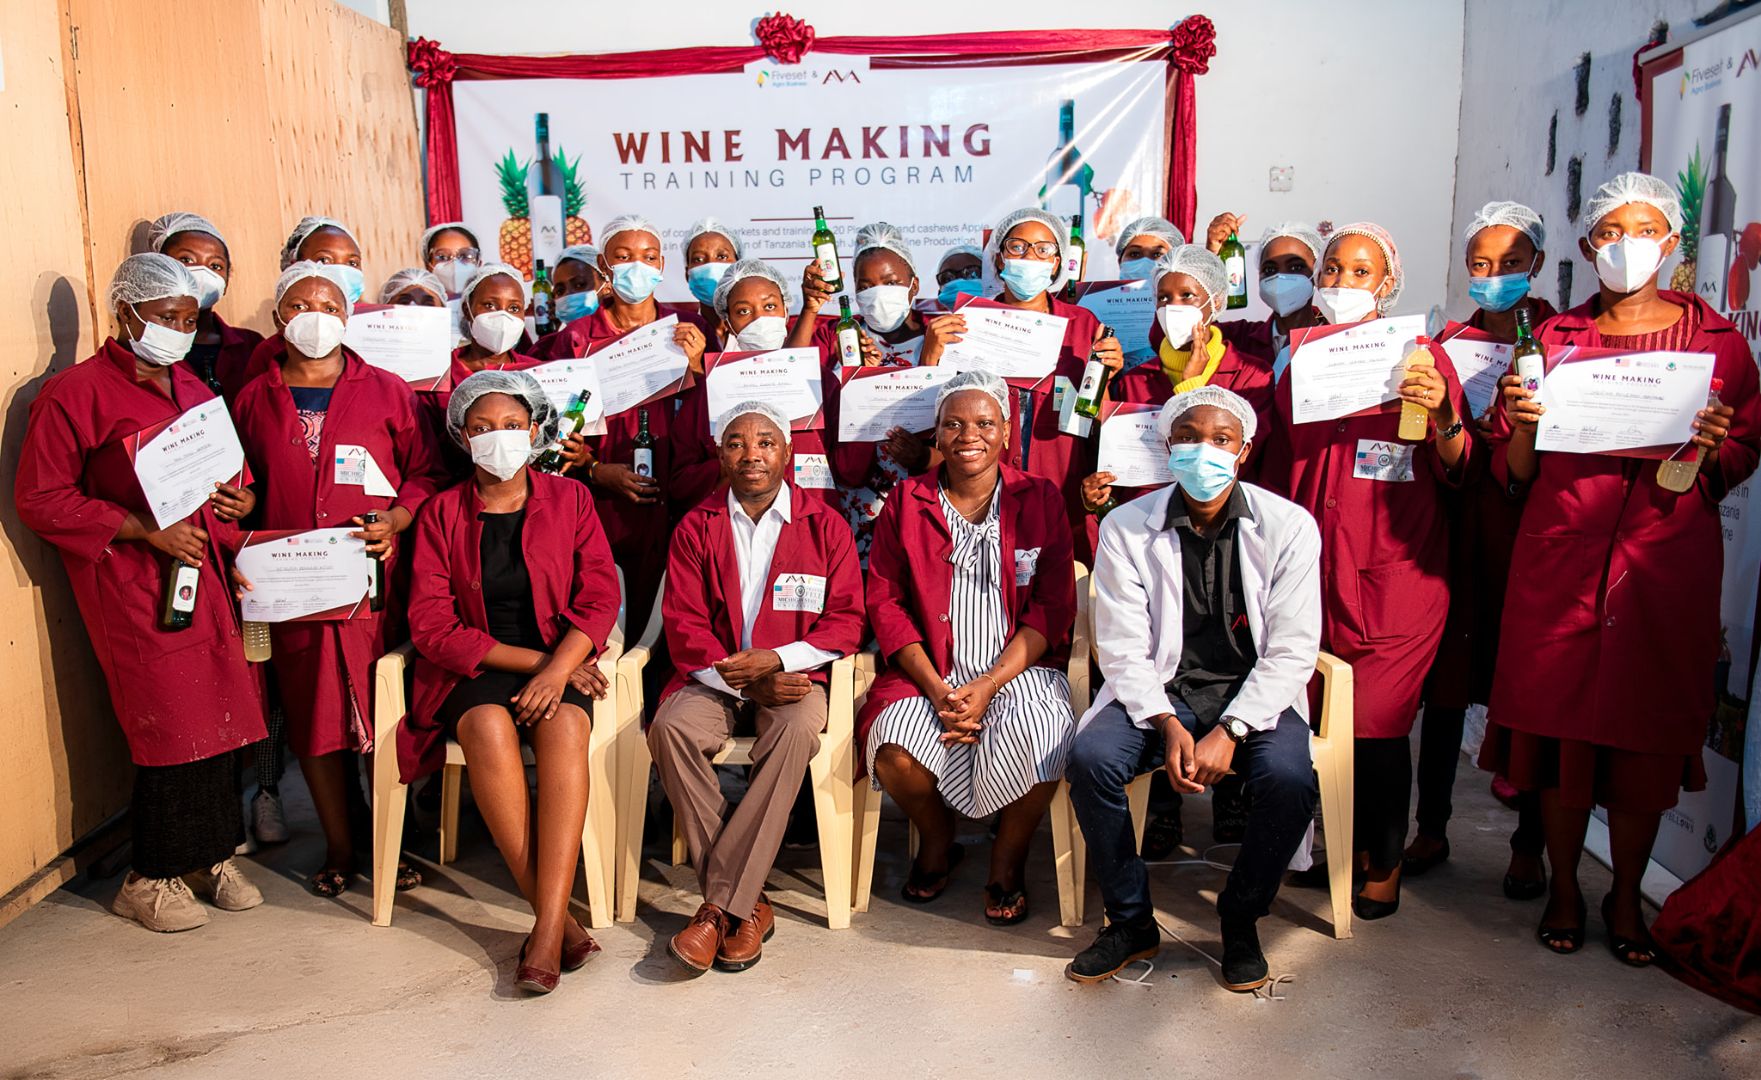 A group of wine making training program participants sit together in red gowns and protective gear holding certificates